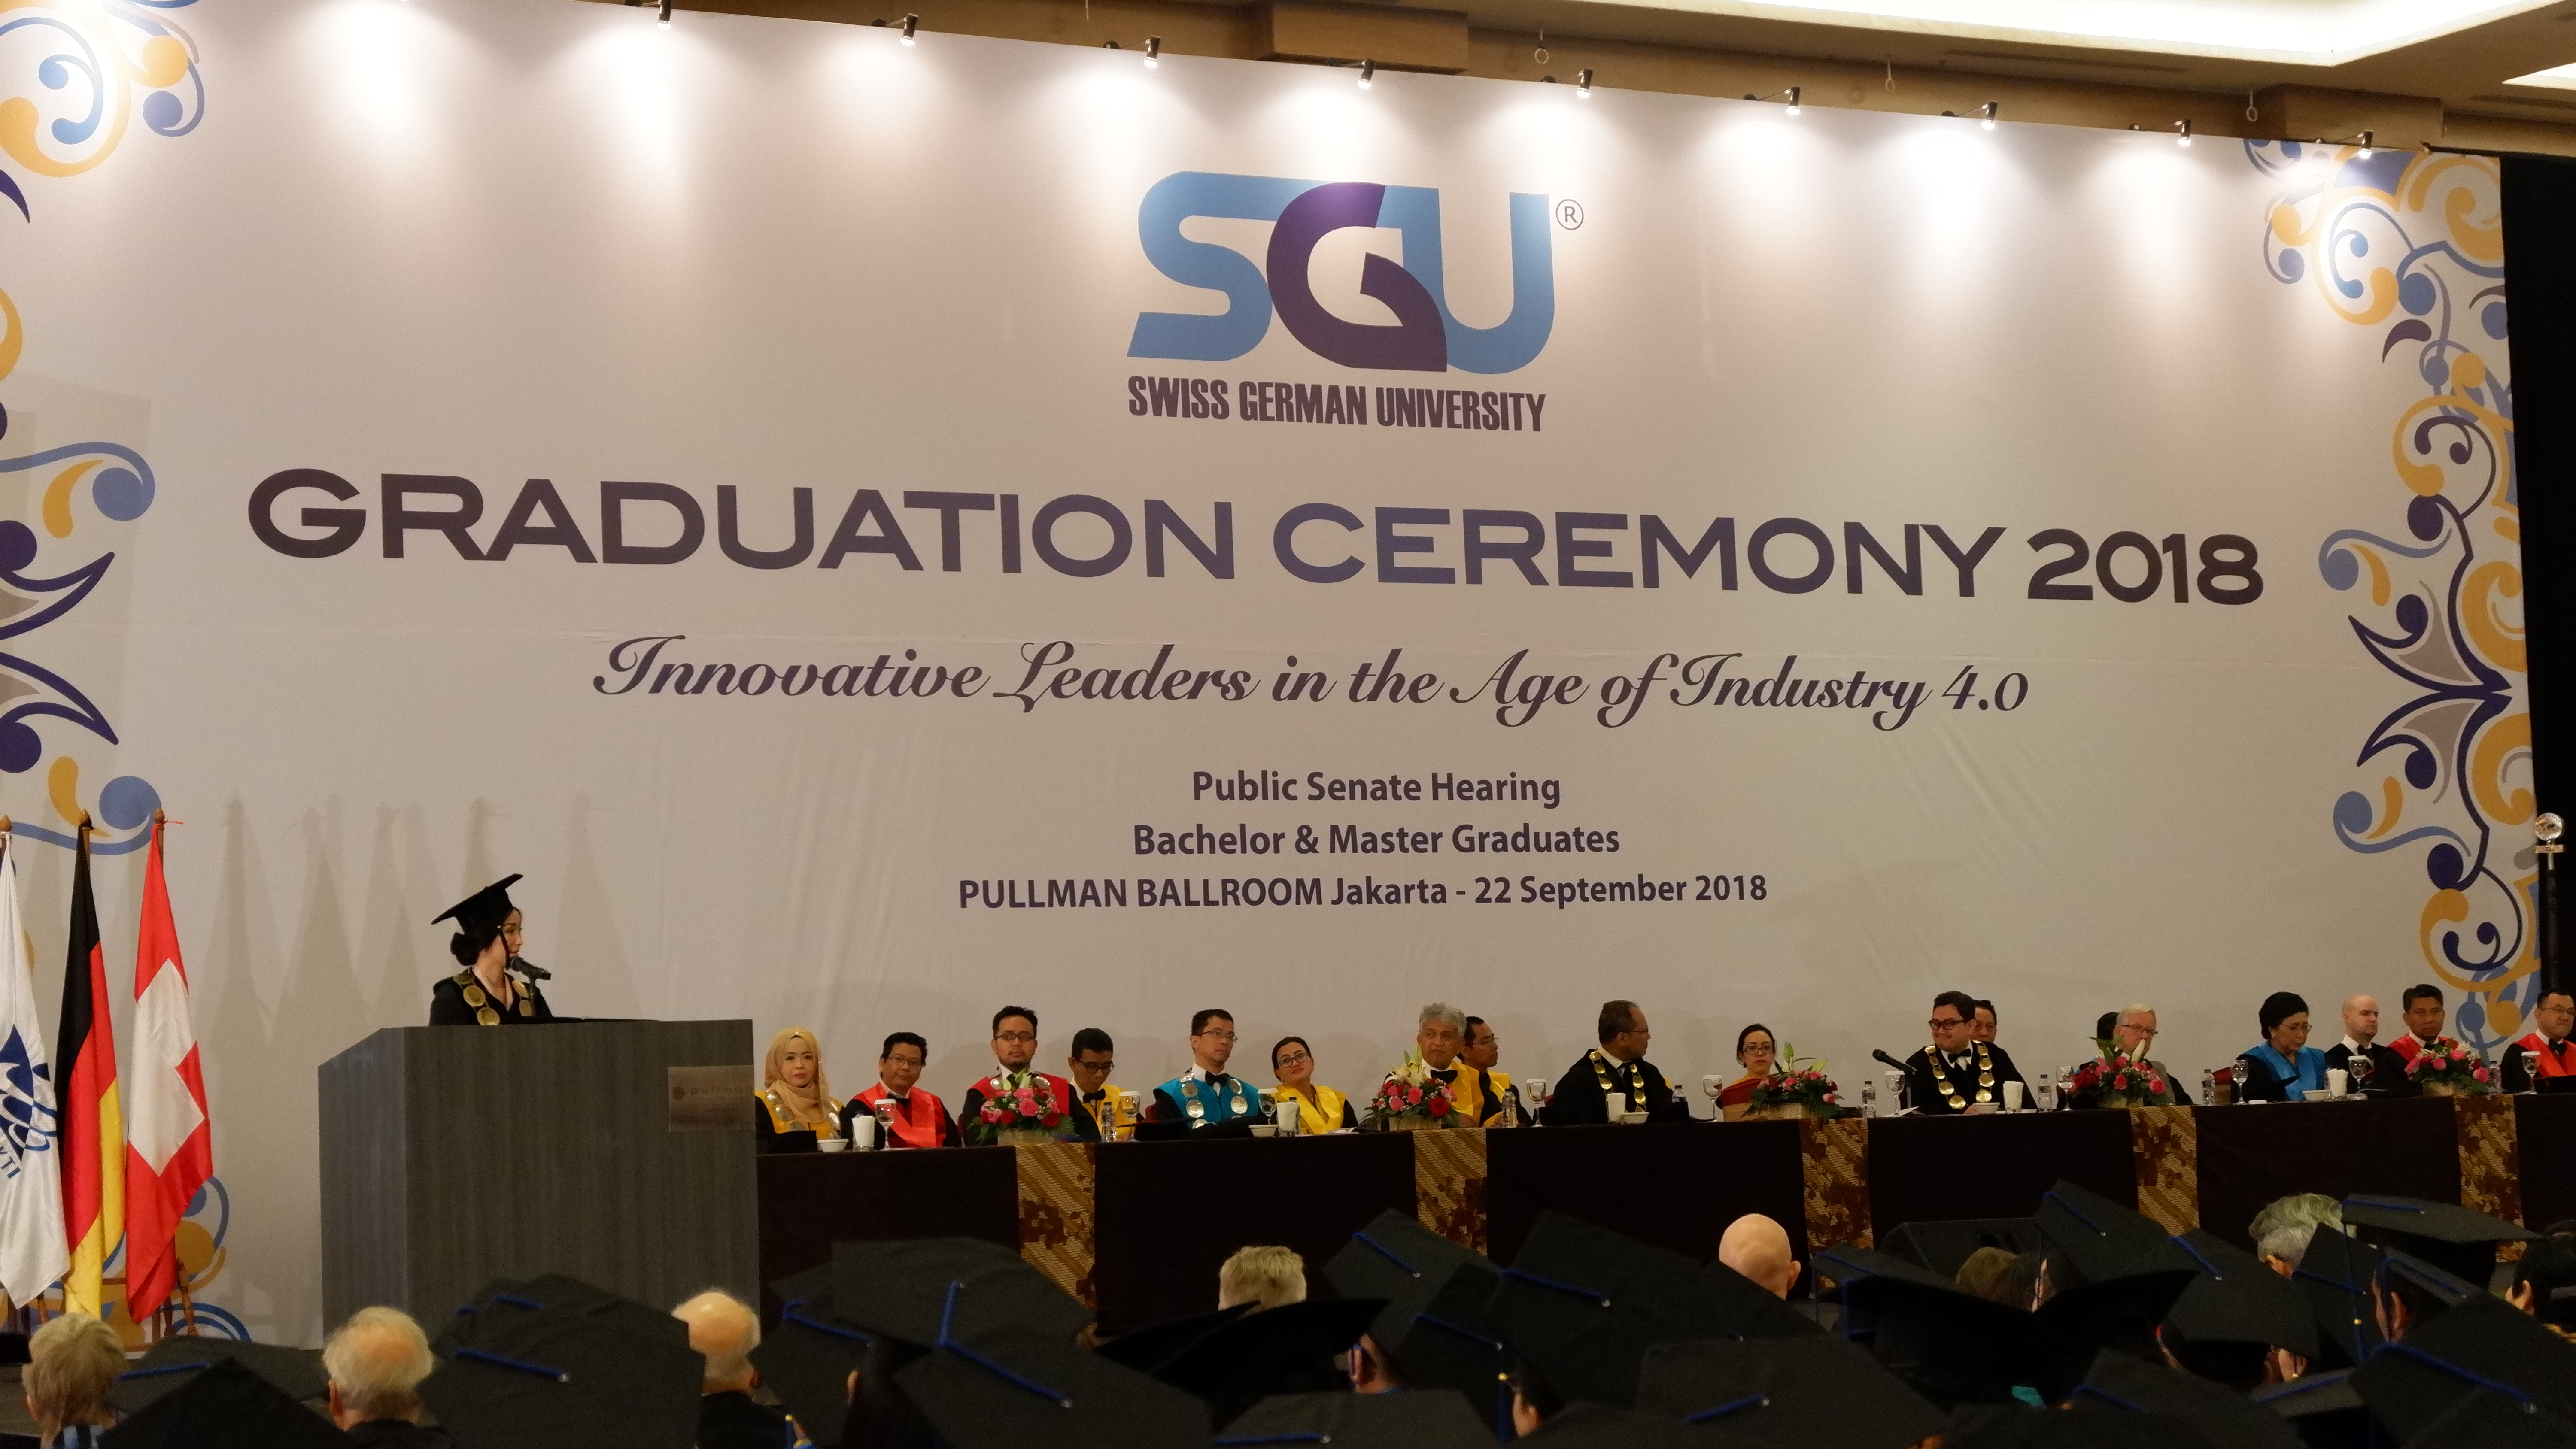 Swiss German University Generates Innovative Leaders in the Age of Industry 4.0 (Graduation Ceremony 2018)